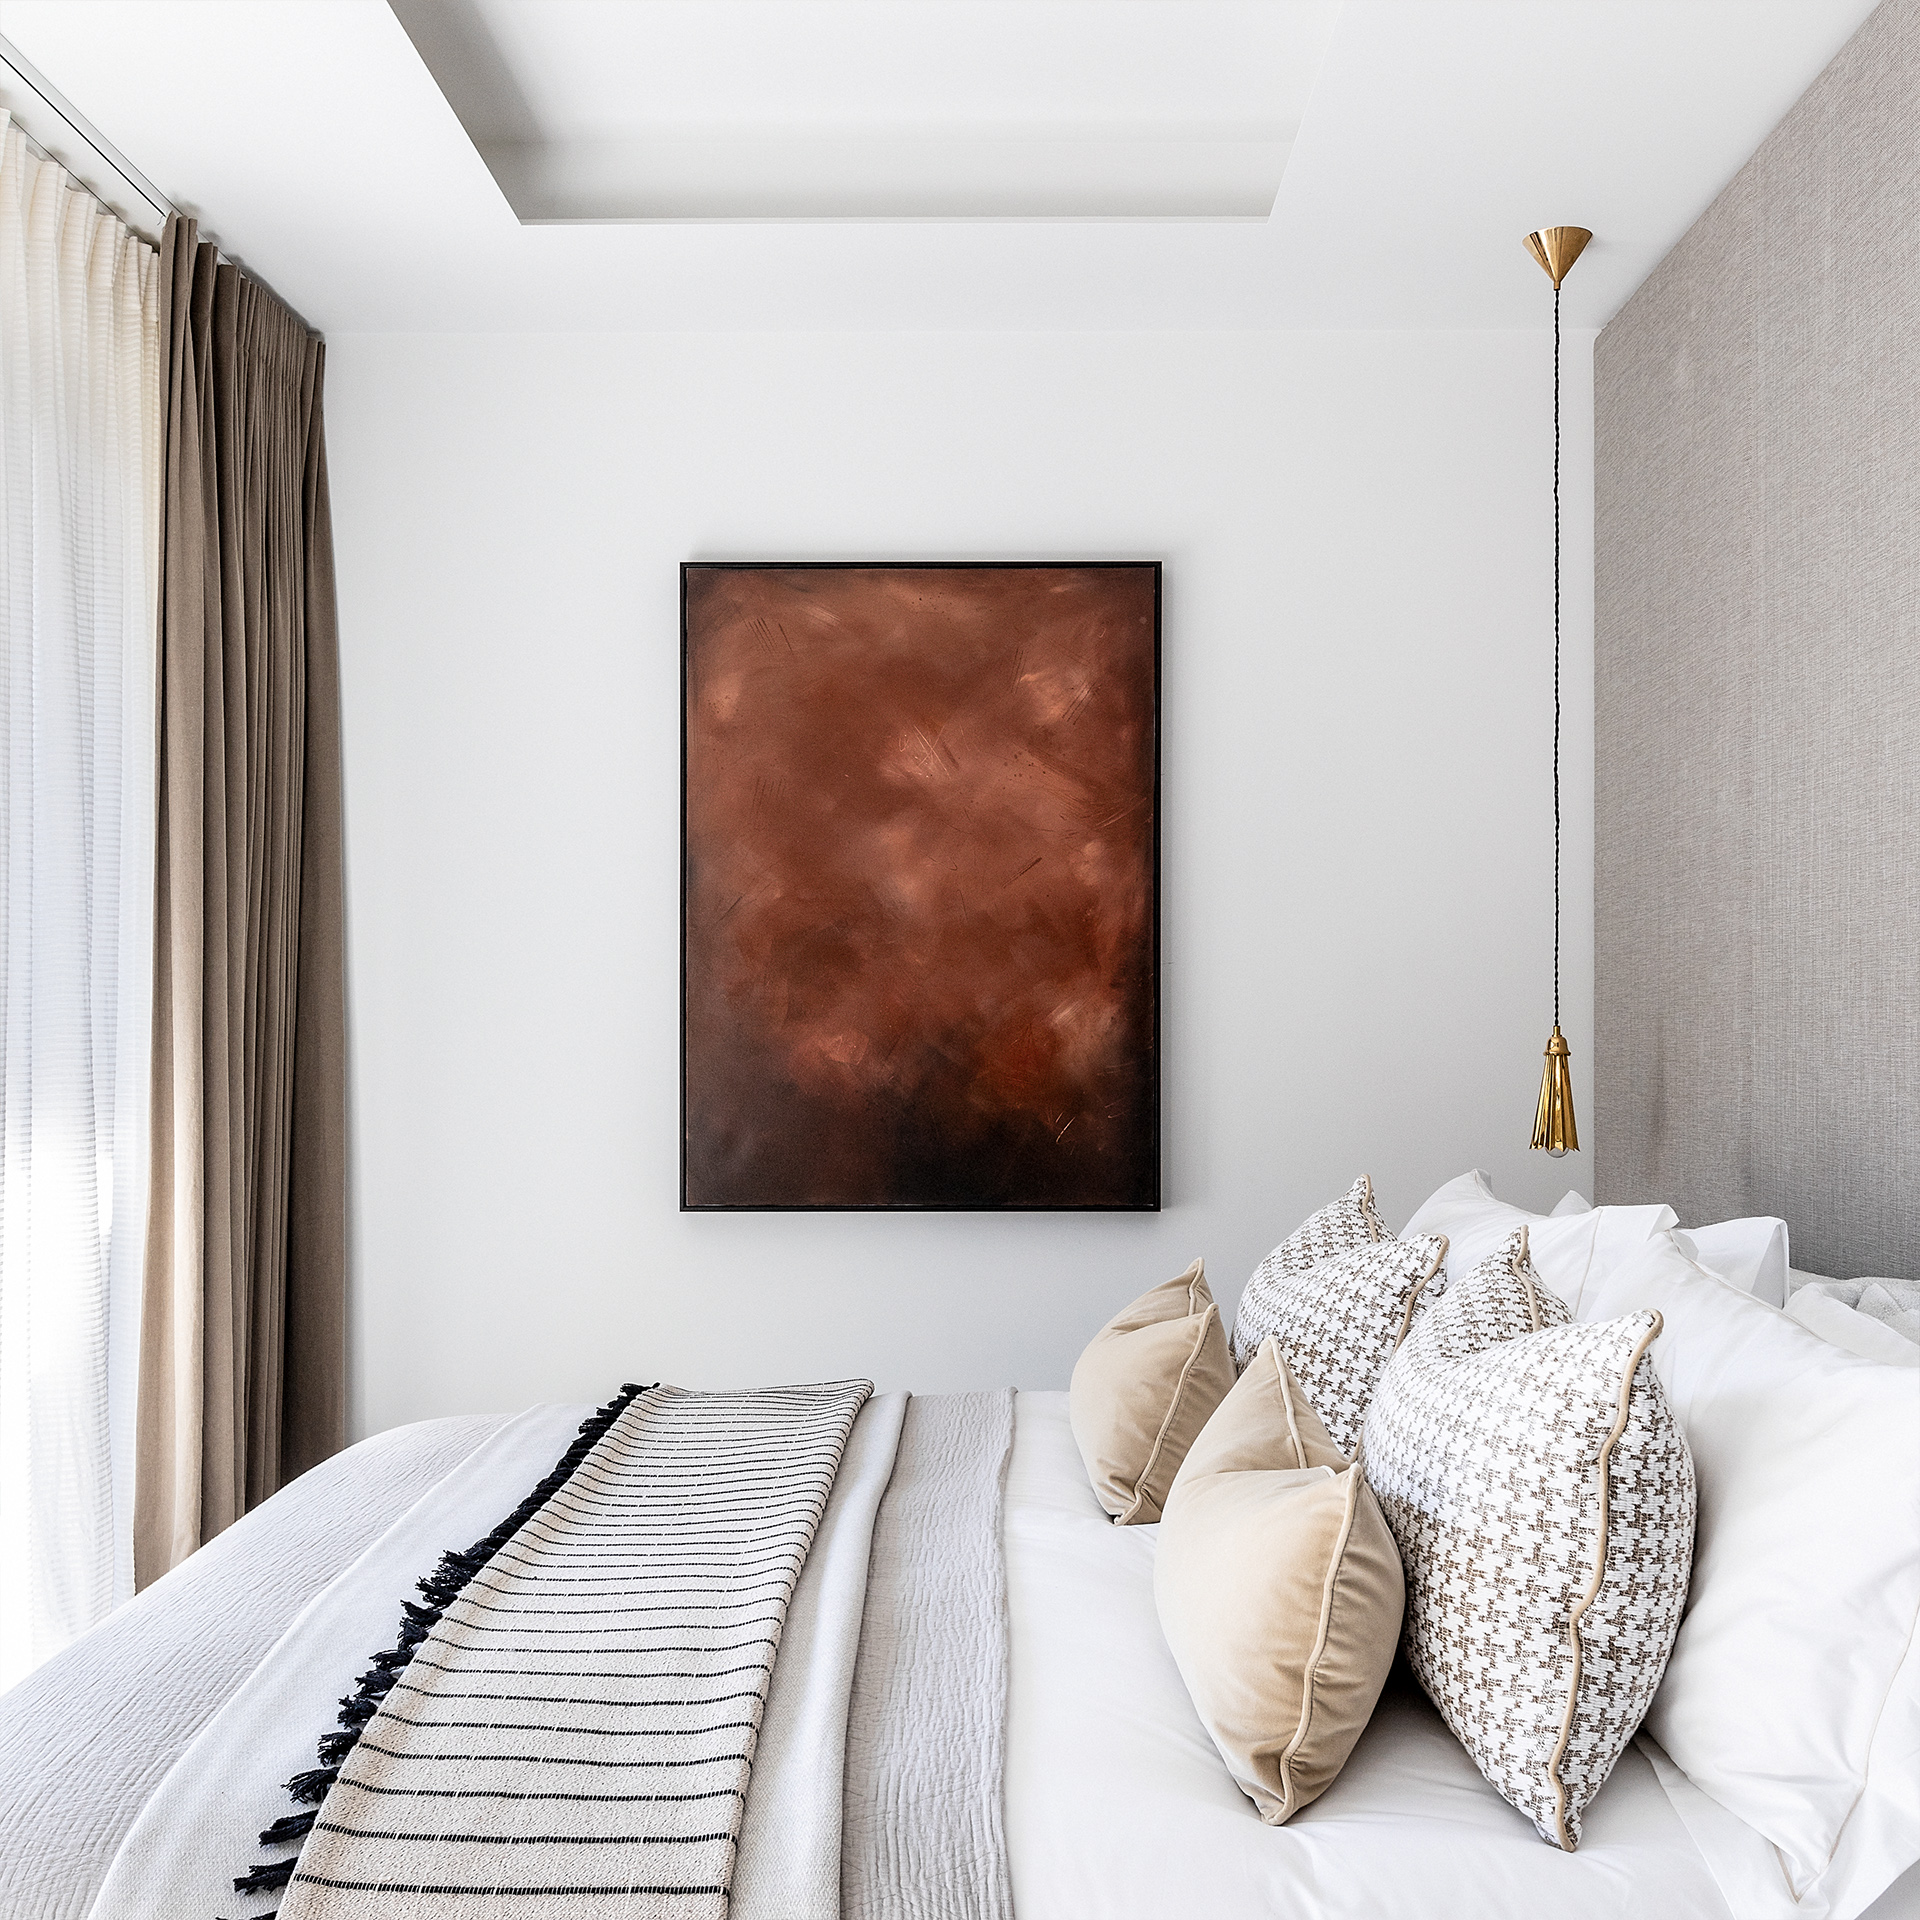 One St. John's Wood | Natural copper artwork contrasts with the room | Angel O'Donnell